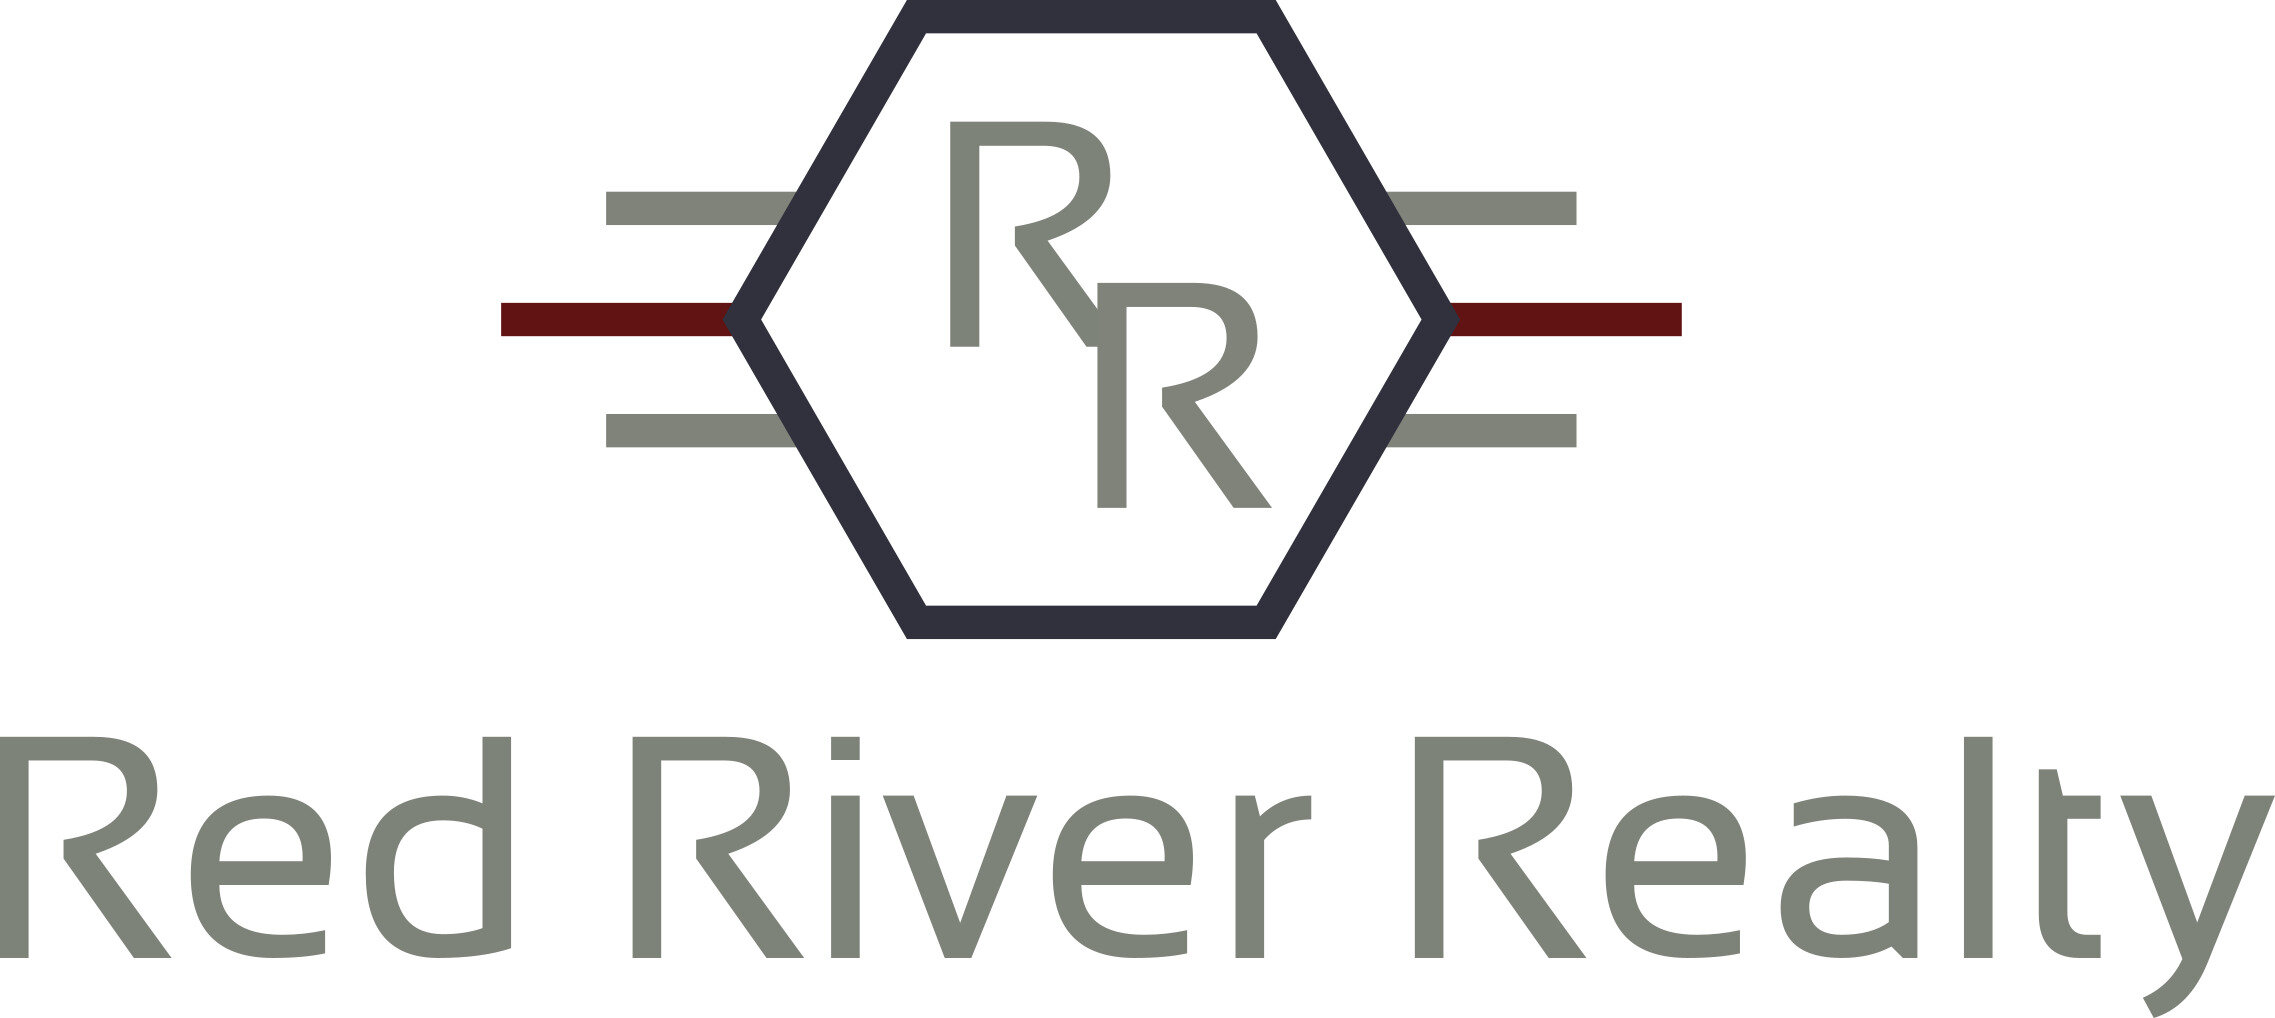 Red River Realty